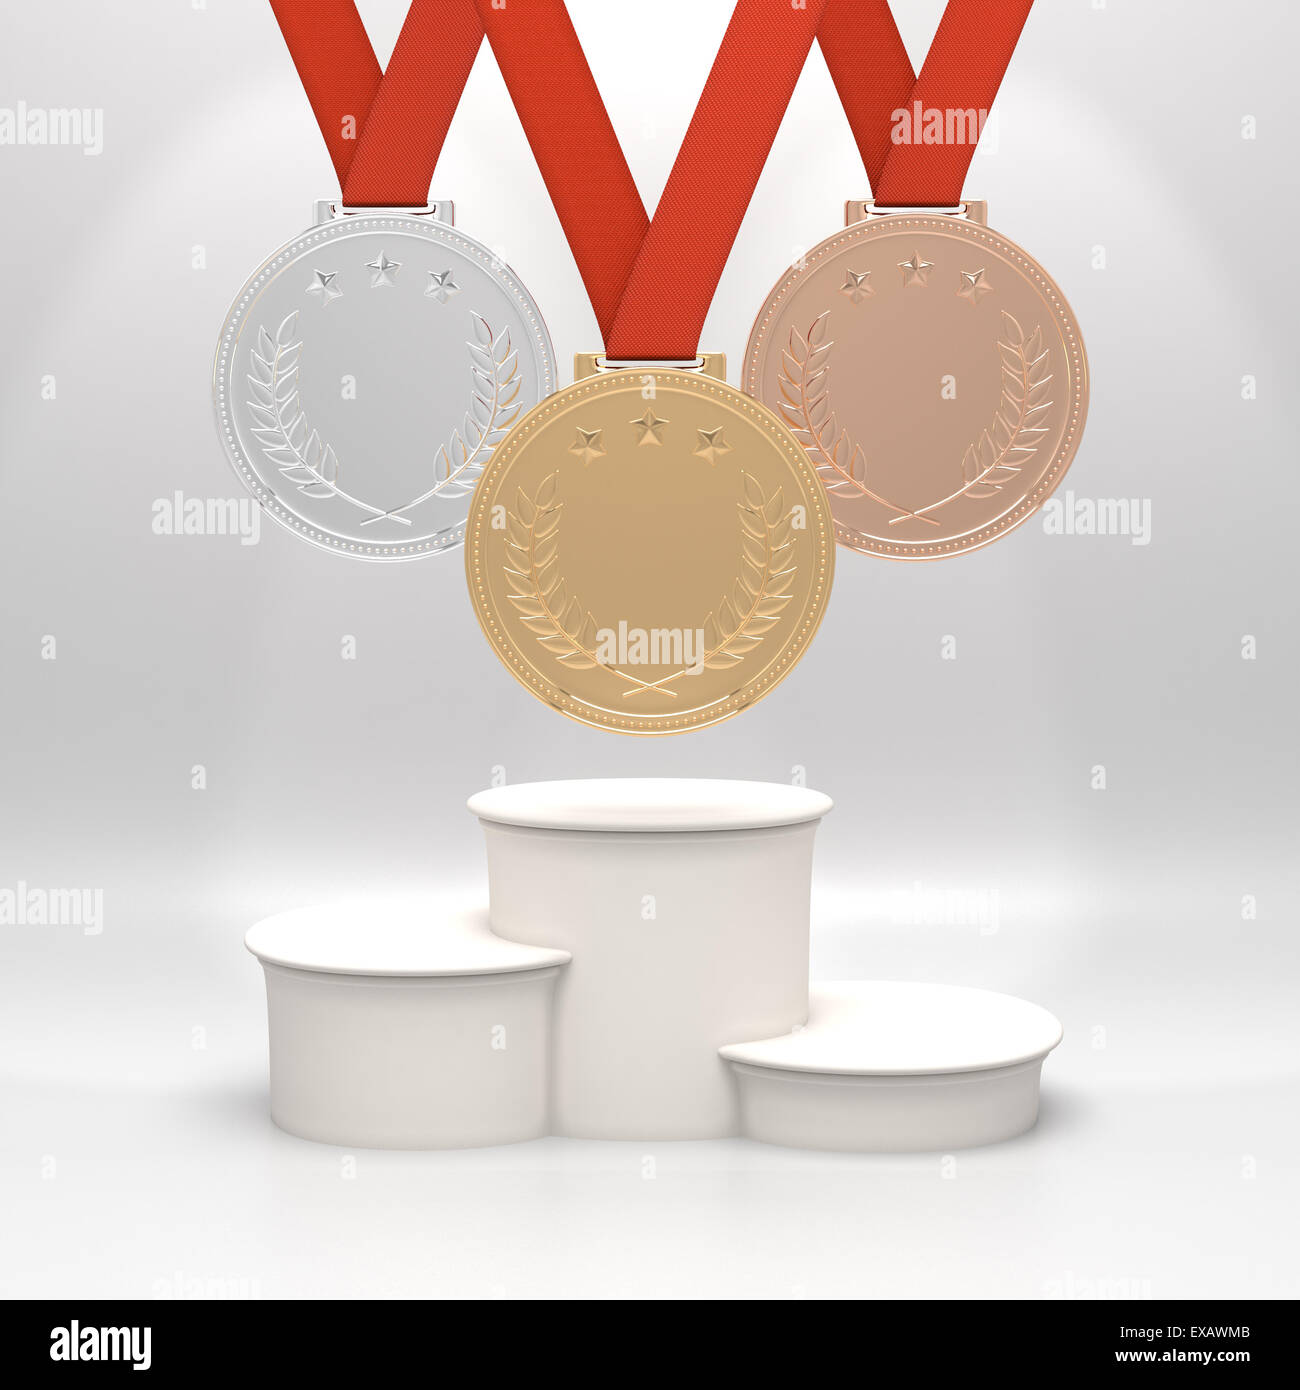 Medals and podium Stock Photo